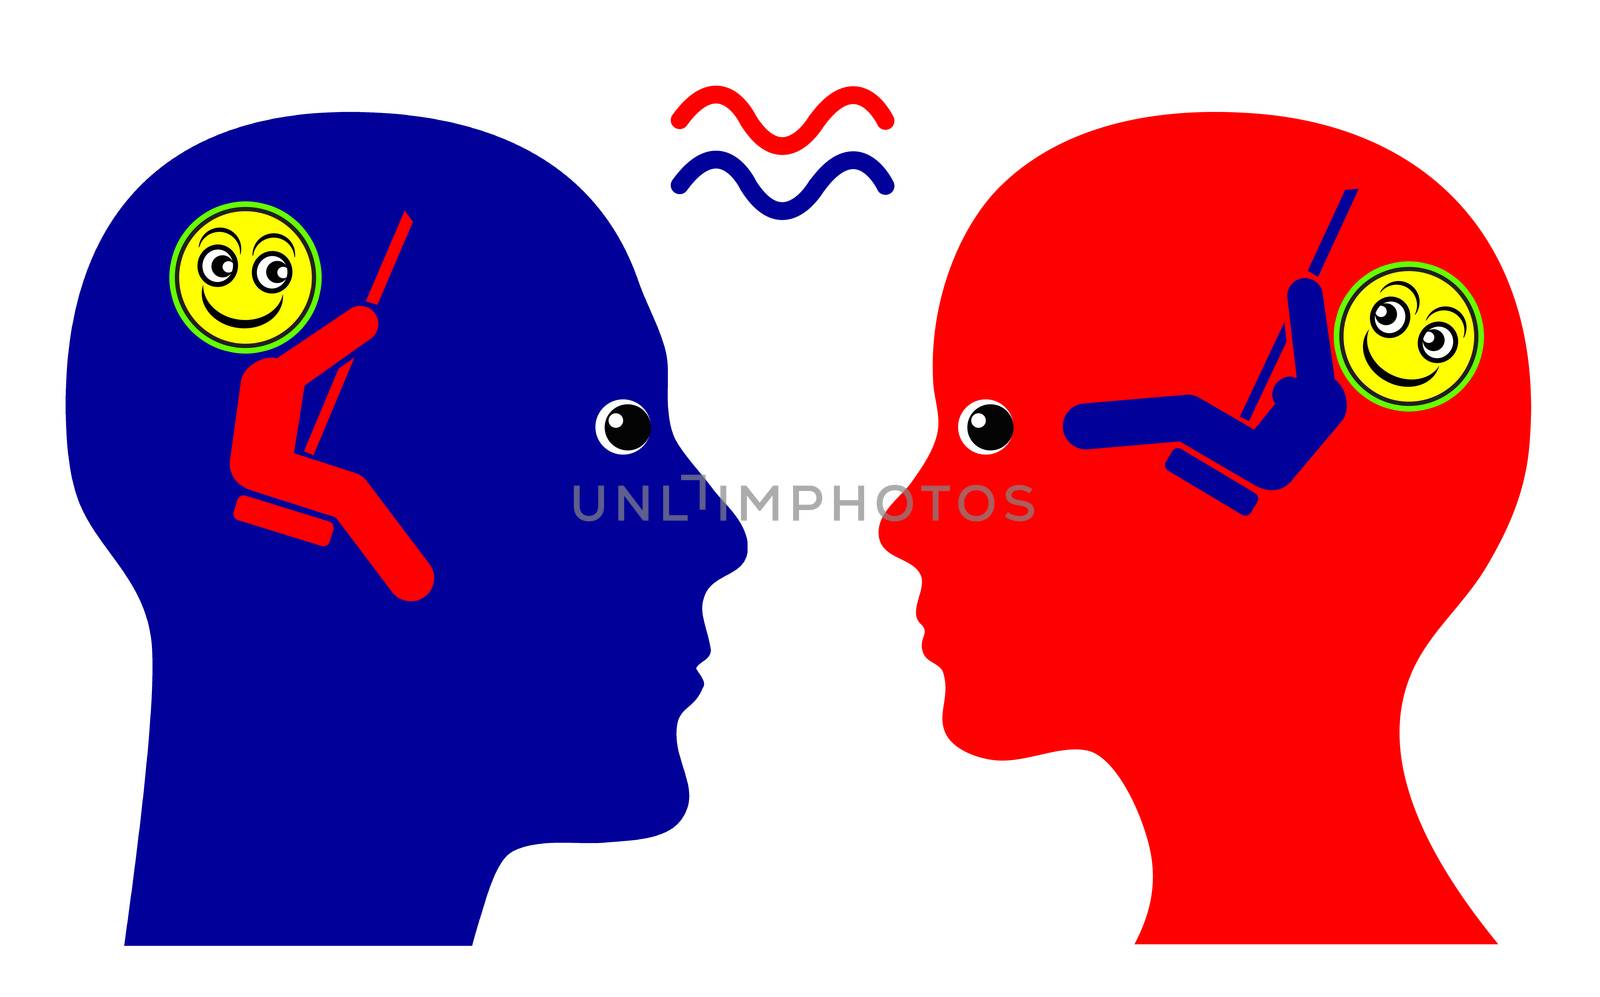 Concept sign of mutual sympathy and sense of community between man and woman